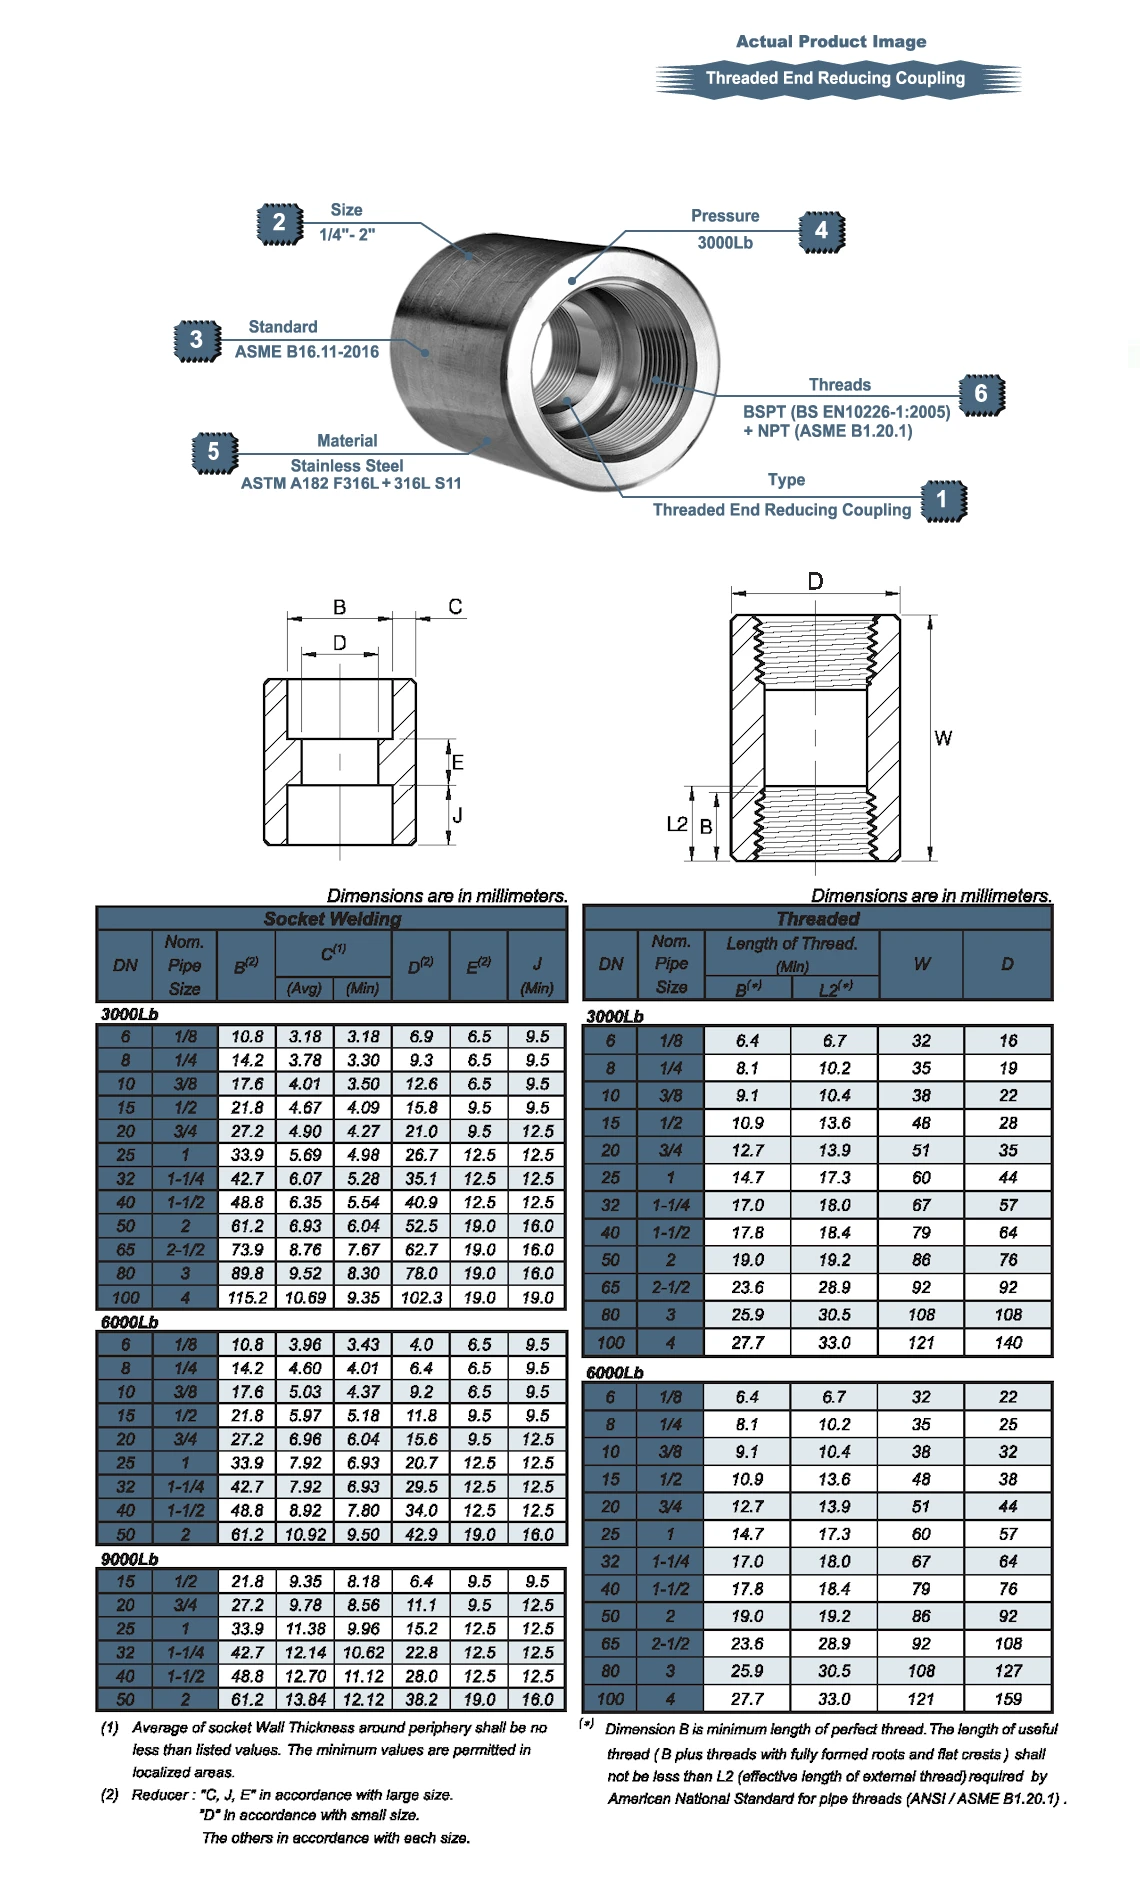 S/S High Presure BSPT Threaded End Reducing Coupling Drawing